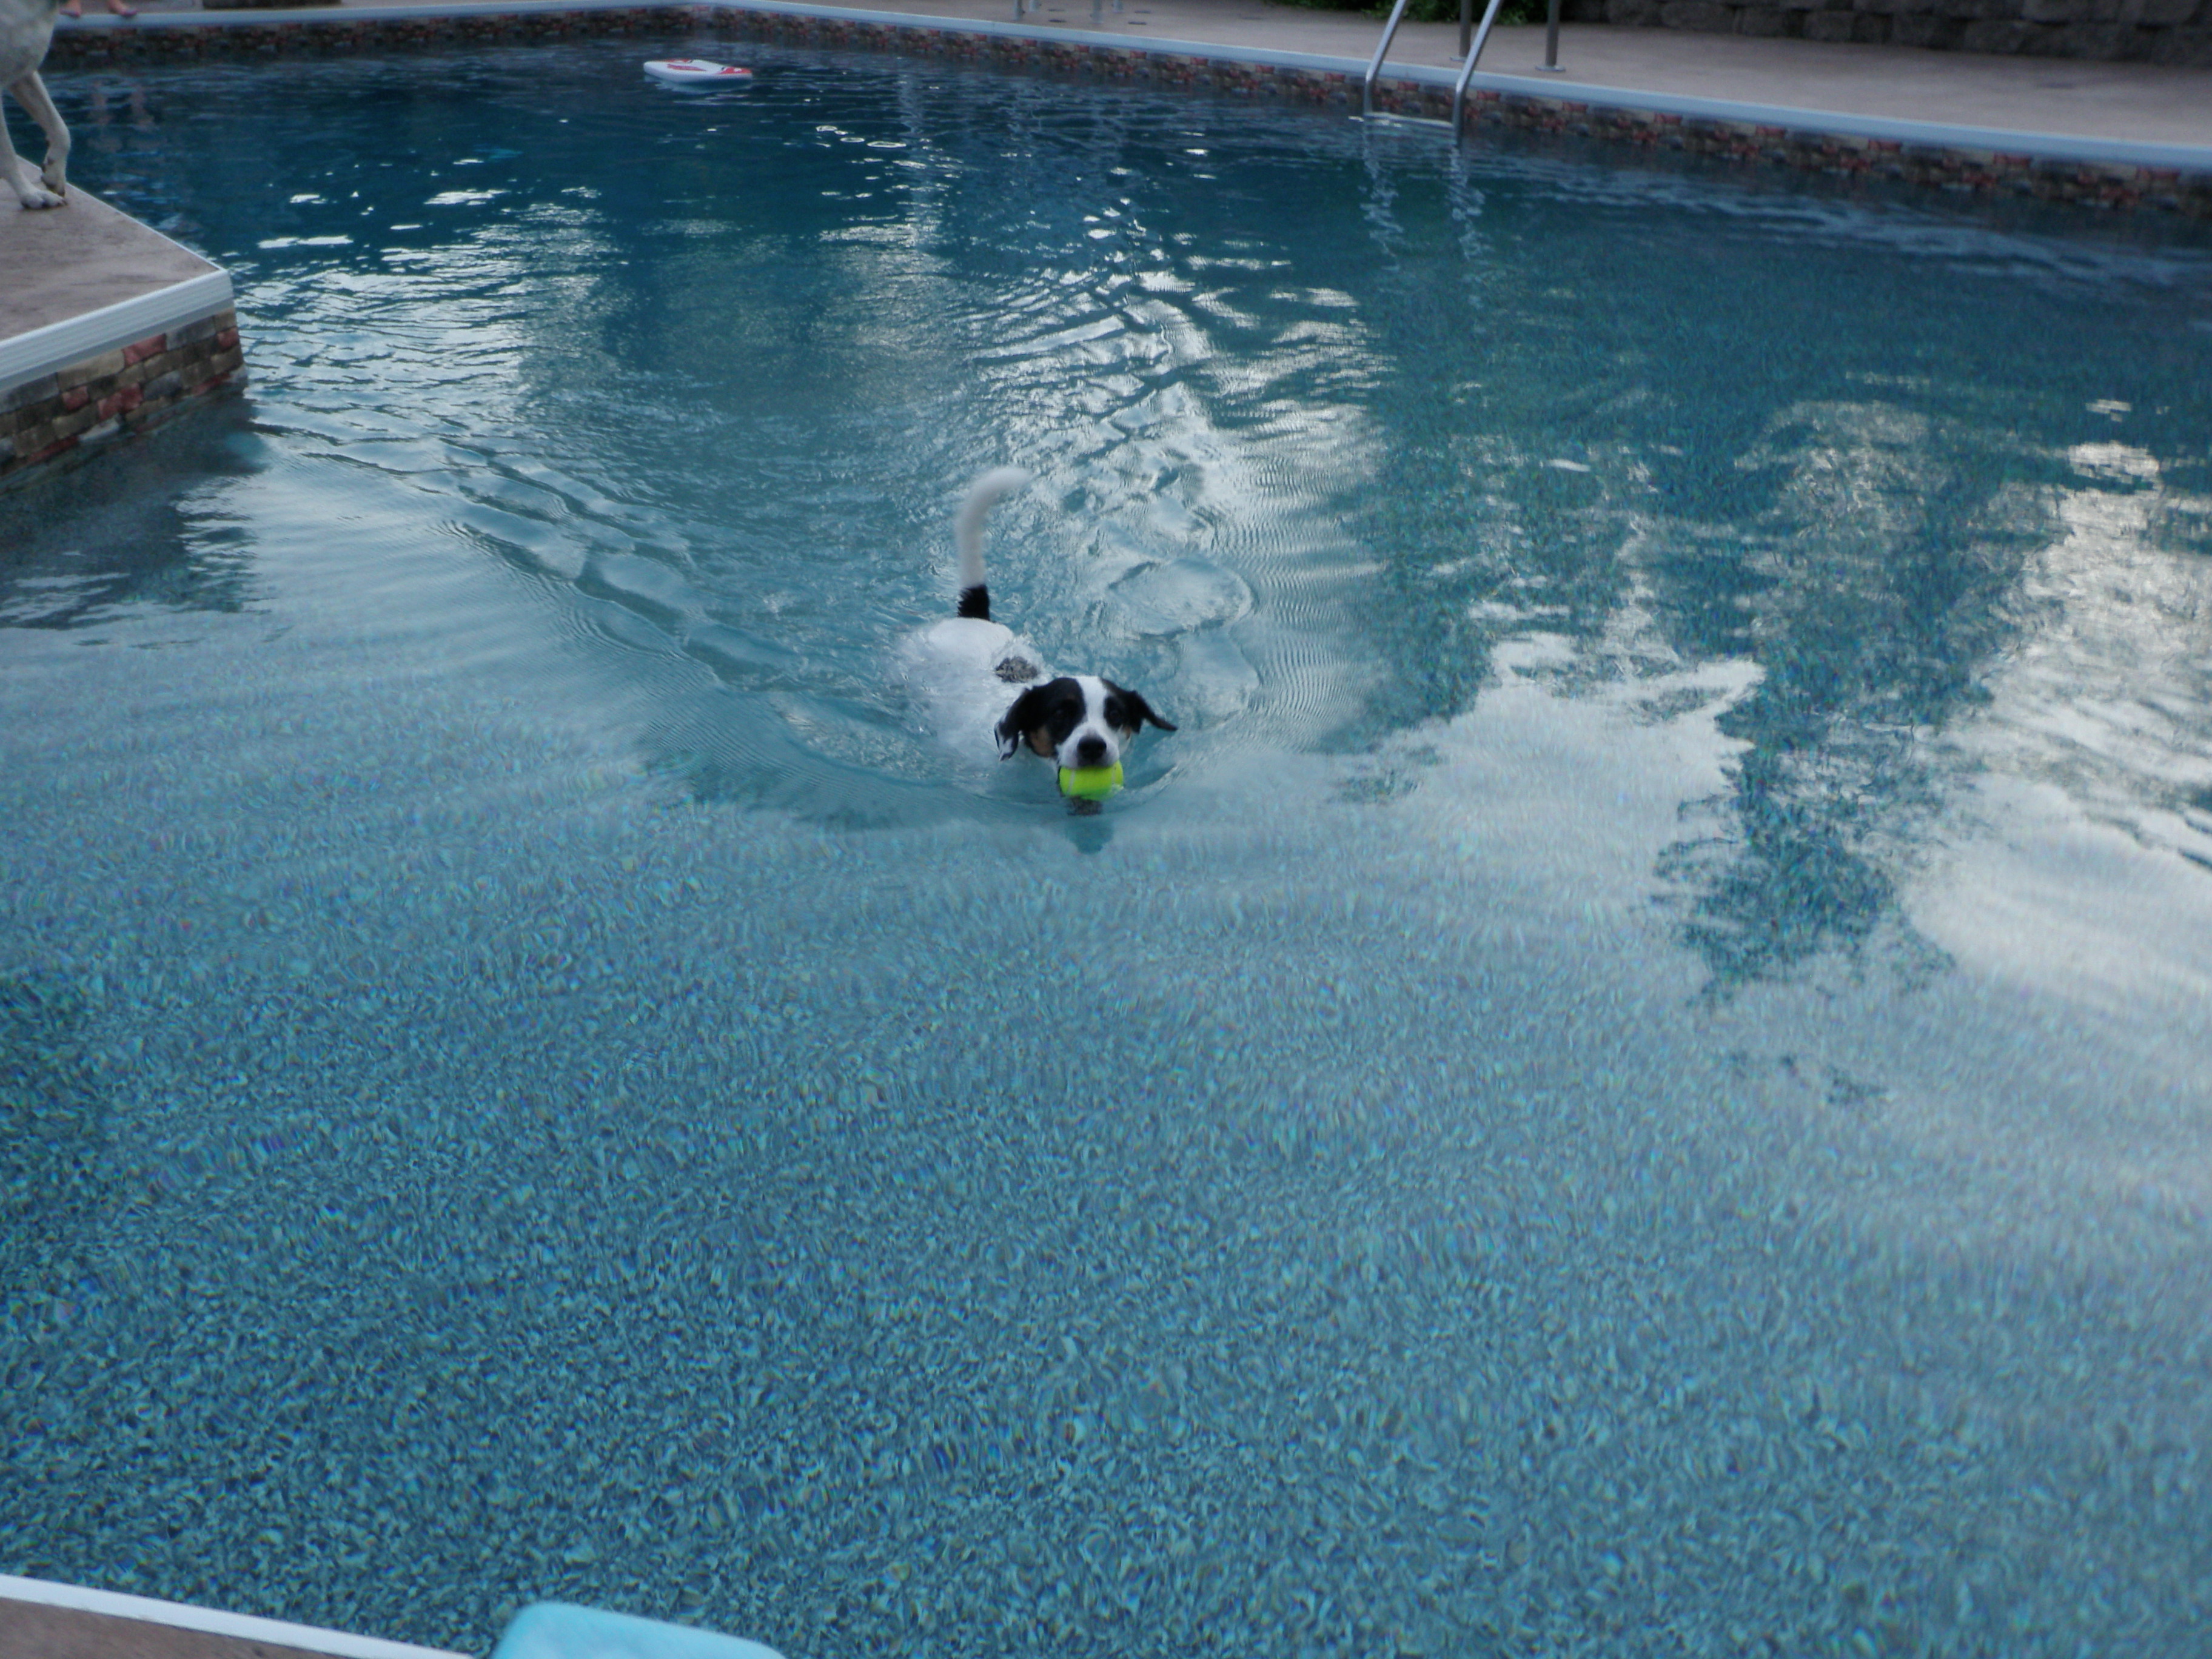 Piper swimming in the pool, use to be one of his favourite activities